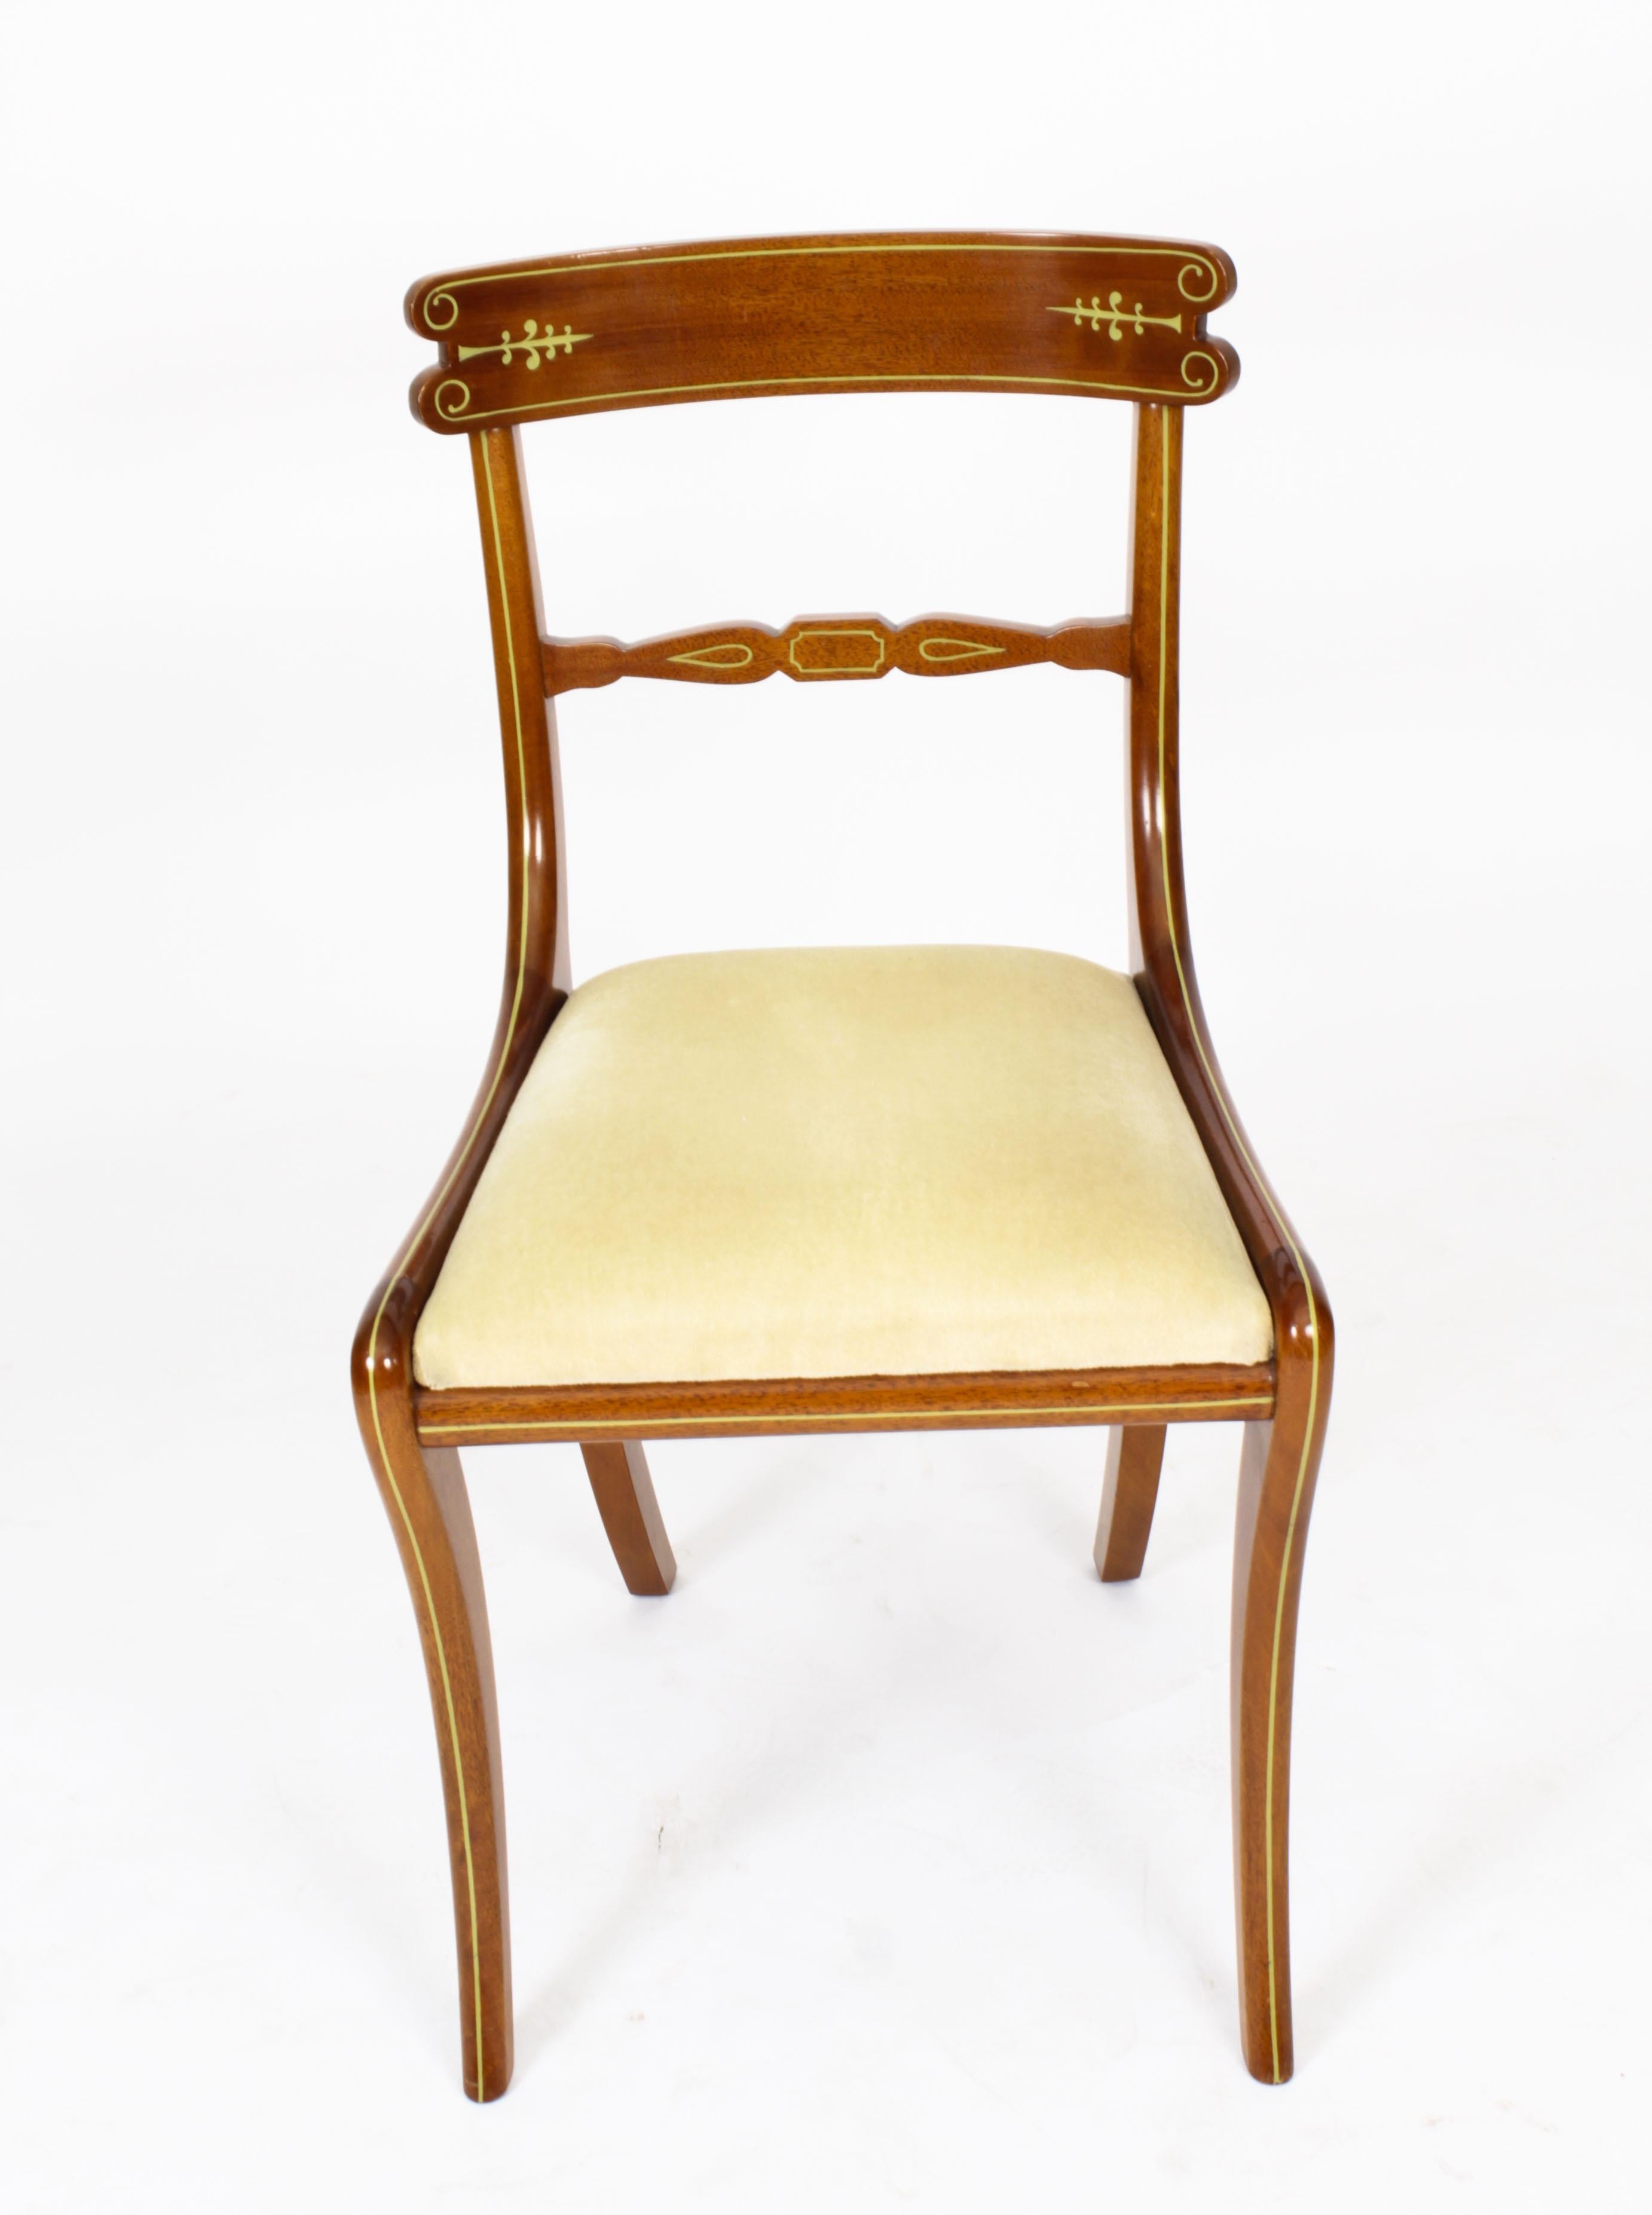 This is  a fabulous Vintage Regency revival side chair by William Tillman, Circa 1980 in date.

Purchased at great expense from the master cabinet maker William Tillman, Crouch Lane, Borough Green Kent in the 1980s.

The chair featuring attractive